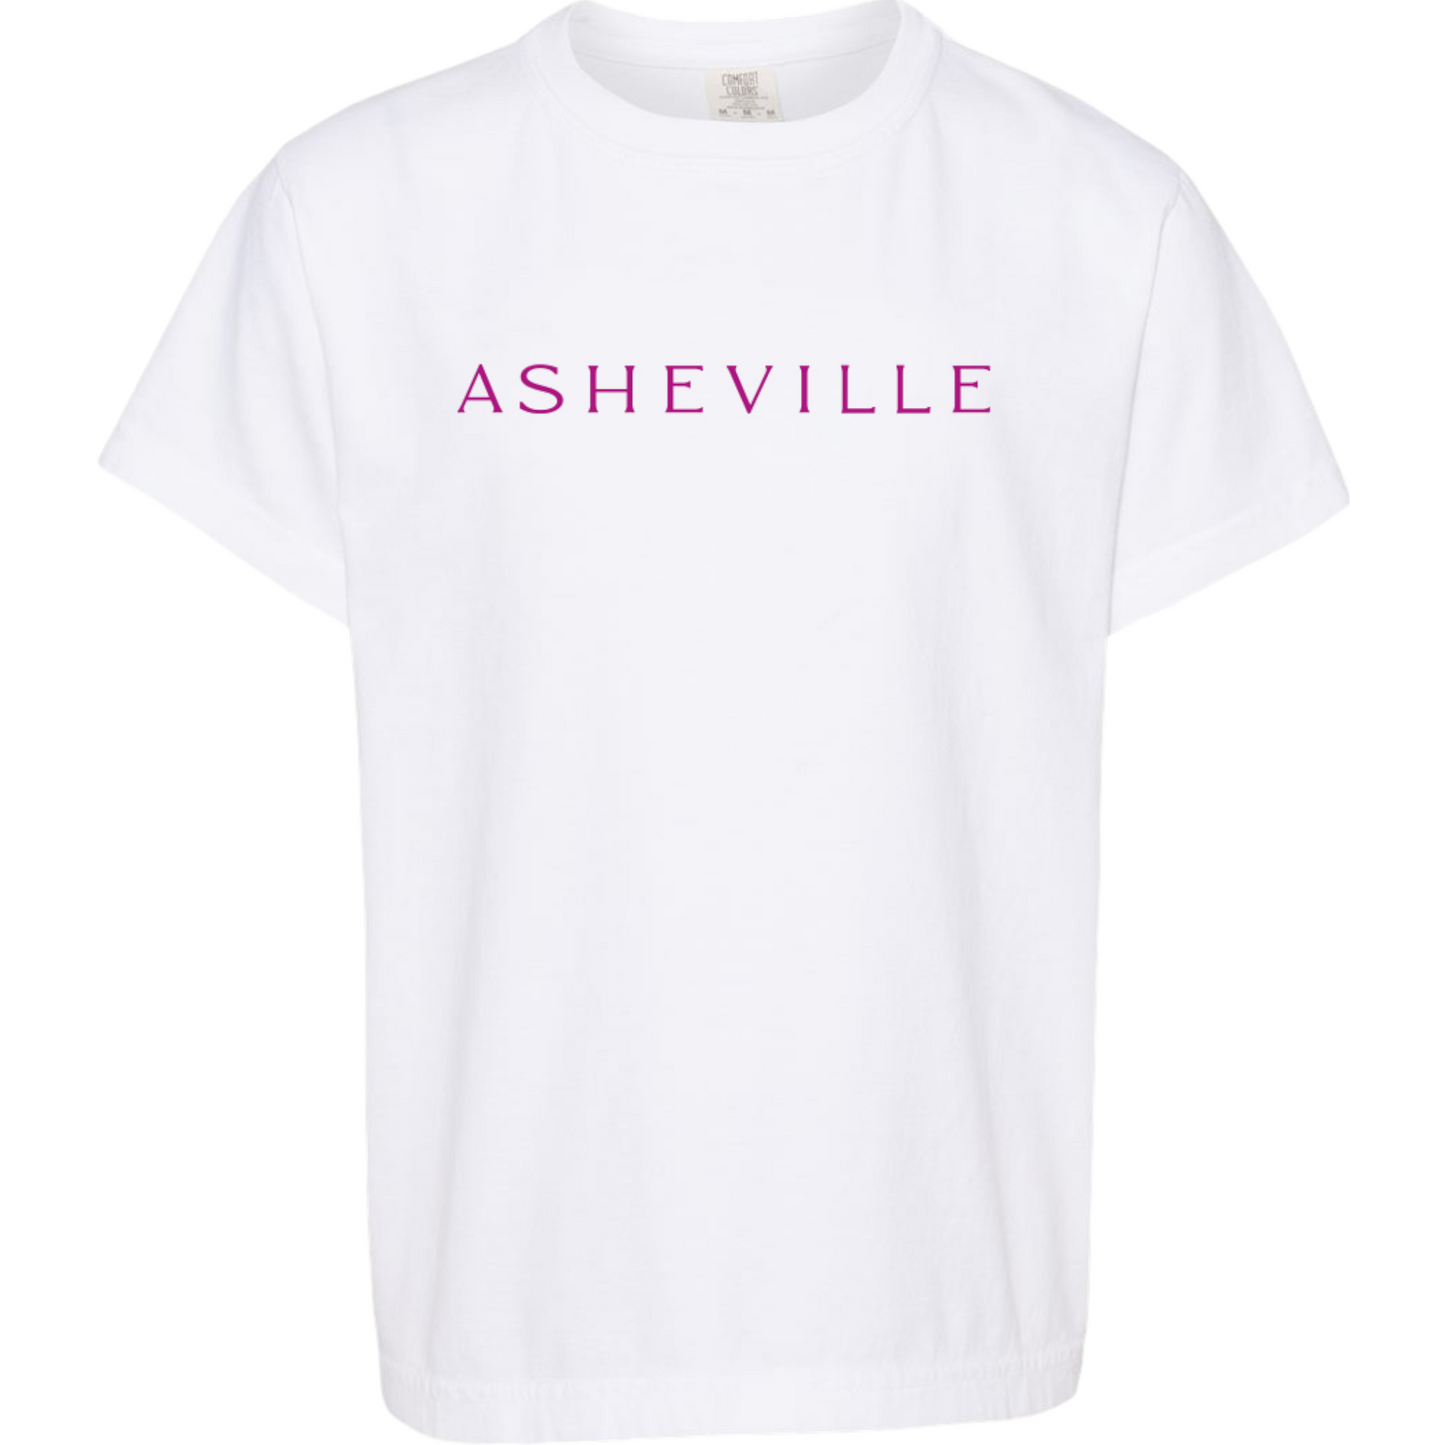 ASHEVILLE Kids Cityscape T-Shirt White & Rhododendron Pink - The ASHEVILLE Co. TM